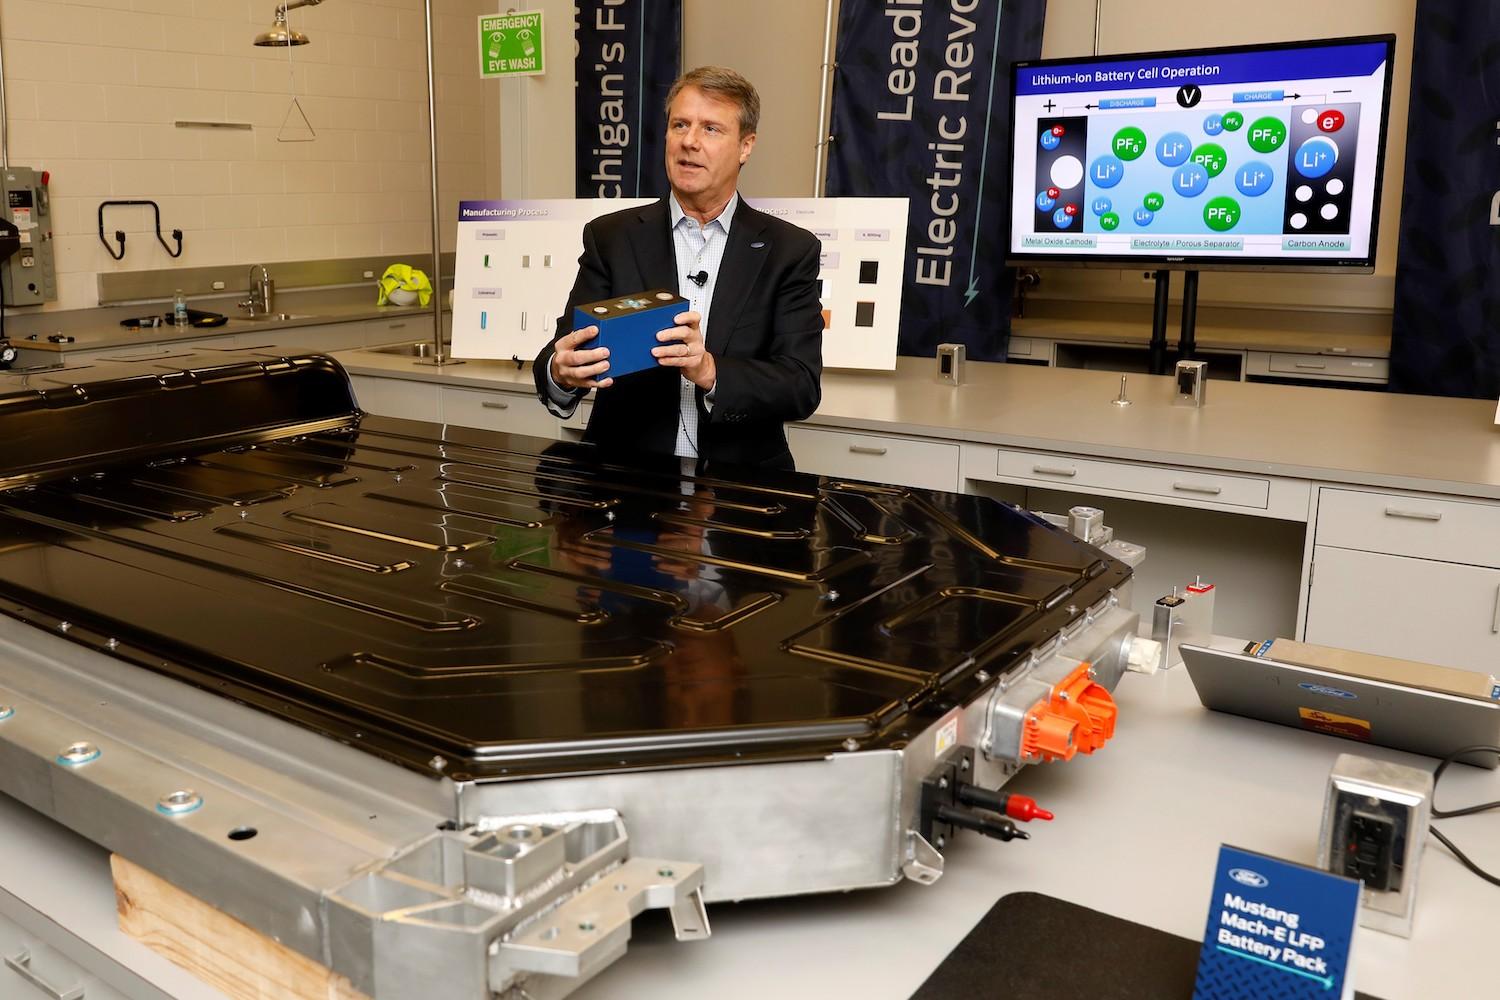 Ford scientist with EV battery - lithium iron phosphate batteries